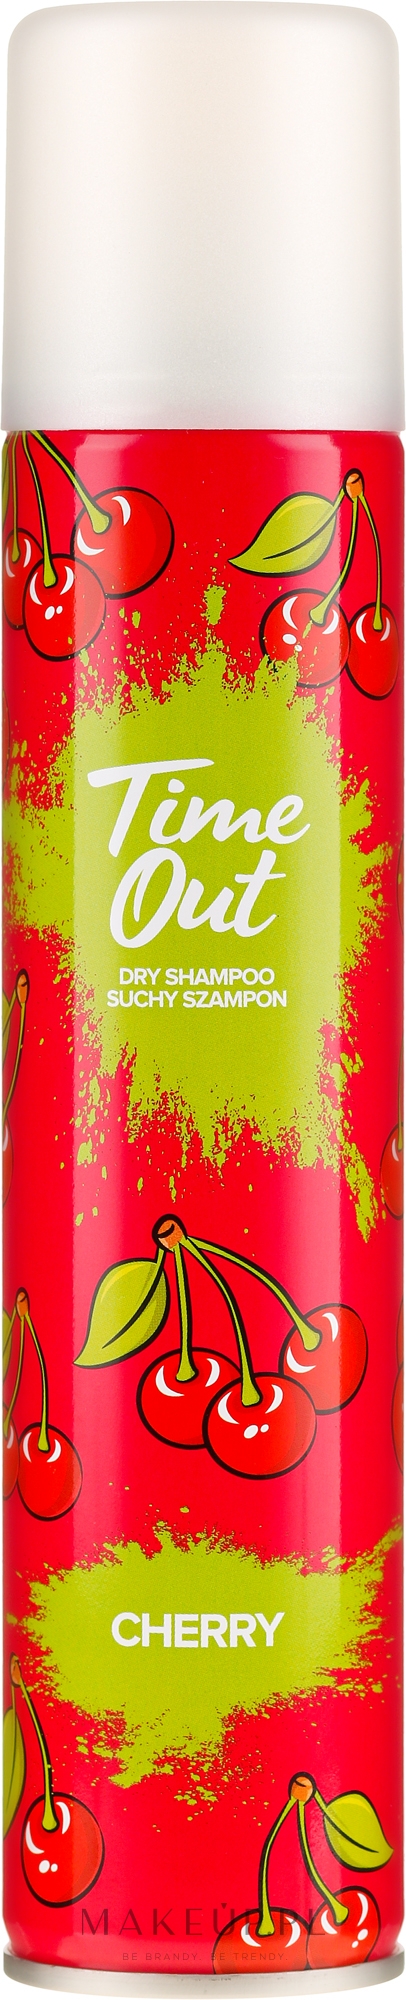 time out suchy szampon wizaz